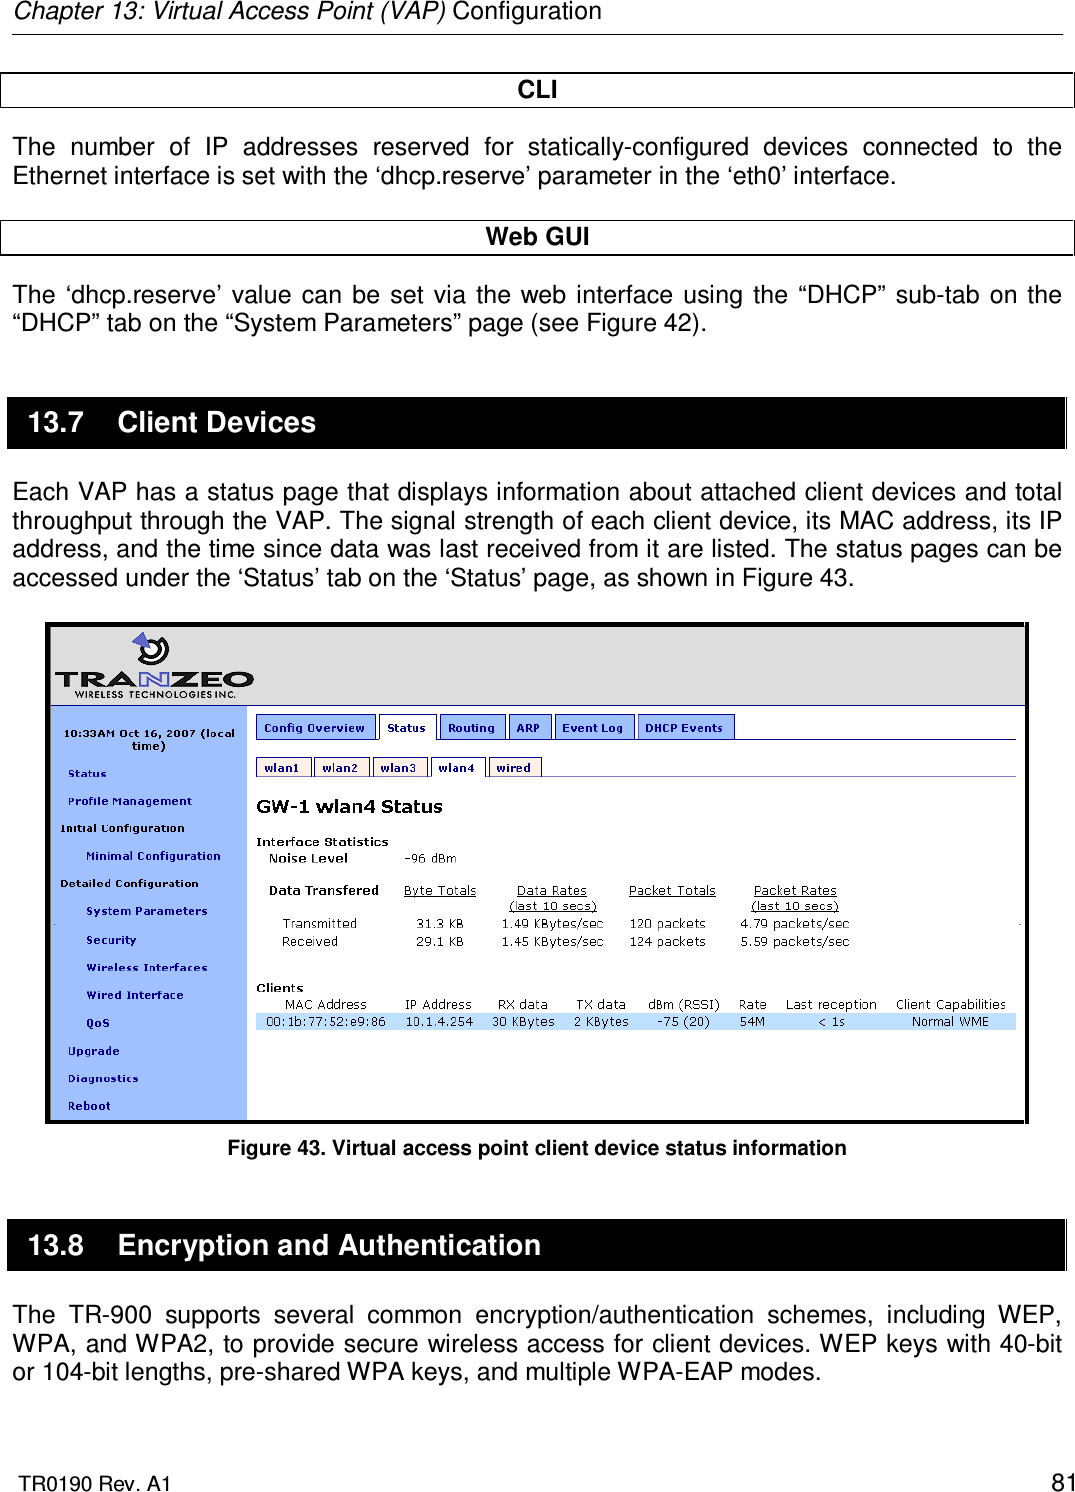 Chapter 13: Virtual Access Point (VAP) Configuration  TR0190 Rev. A1    81 CLI The  number  of  IP  addresses  reserved  for  statically-configured  devices  connected  to  the Ethernet interface is set with the ‘dhcp.reserve’ parameter in the ‘eth0’ interface.  Web GUI The  ‘dhcp.reserve’ value can be  set  via the web  interface  using the “DHCP”  sub-tab on the “DHCP” tab on the “System Parameters” page (see Figure 42).  13.7  Client Devices Each VAP has a status page that displays information about attached client devices and total throughput through the VAP. The signal strength of each client device, its MAC address, its IP address, and the time since data was last received from it are listed. The status pages can be accessed under the ‘Status’ tab on the ‘Status’ page, as shown in Figure 43.   Figure 43. Virtual access point client device status information 13.8  Encryption and Authentication The  TR-900  supports  several  common  encryption/authentication  schemes,  including  WEP, WPA, and WPA2, to provide secure wireless access for client devices. WEP keys with 40-bit or 104-bit lengths, pre-shared WPA keys, and multiple WPA-EAP modes.   